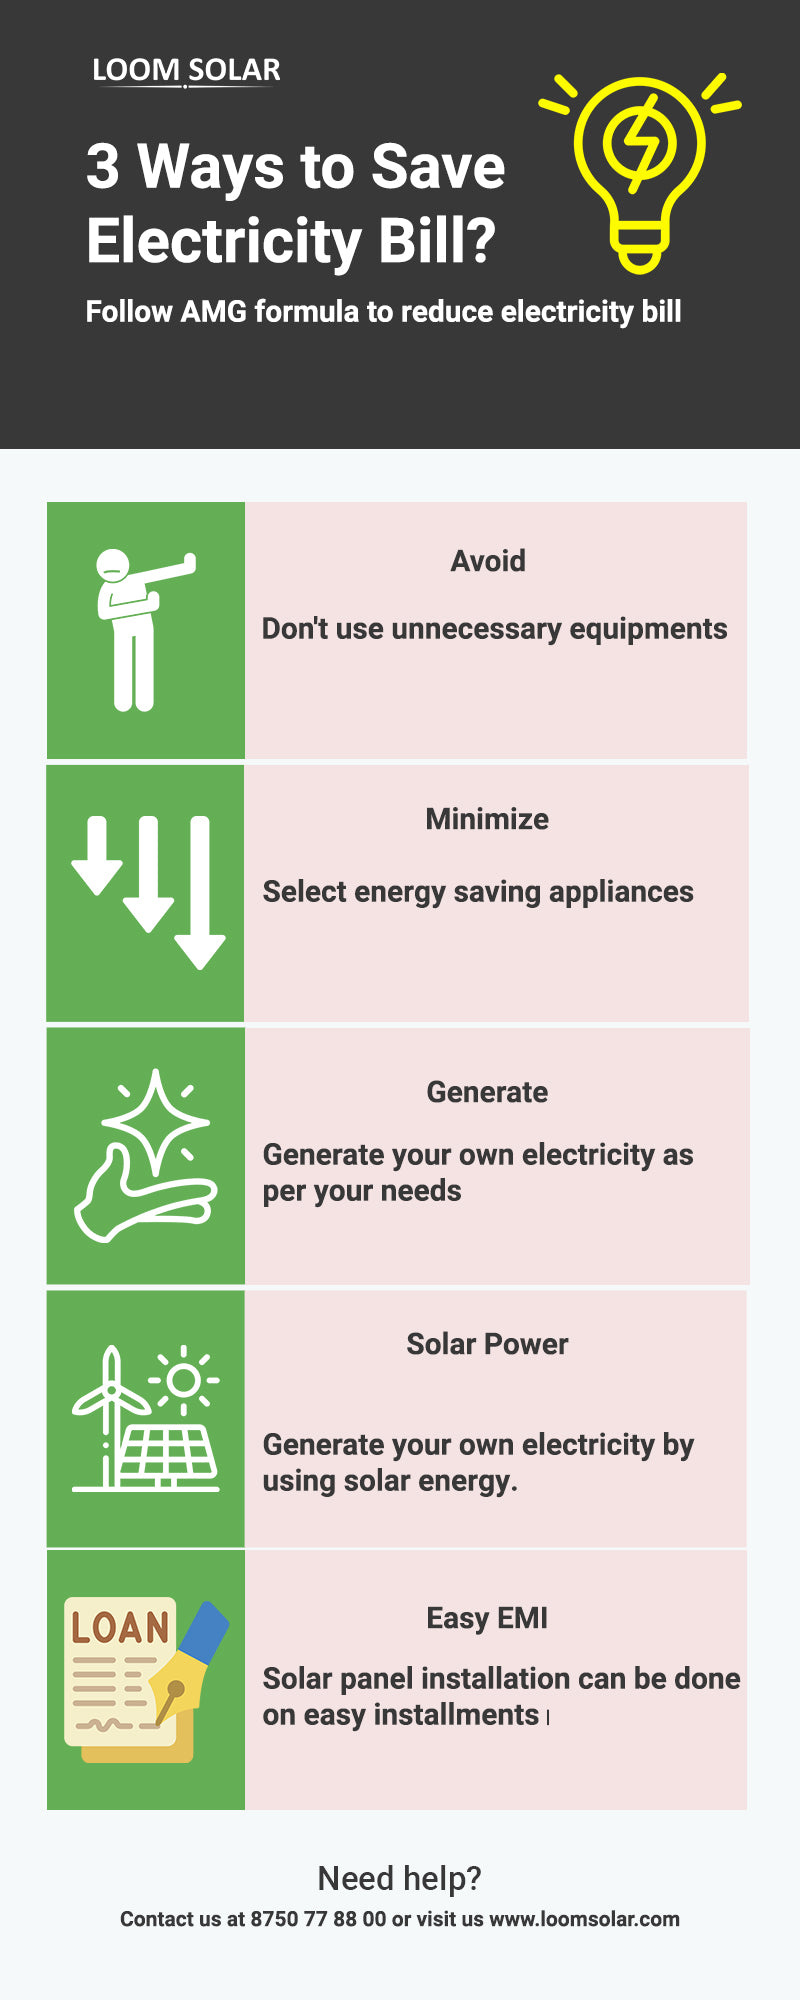 How to Save Your Electricity Bill?